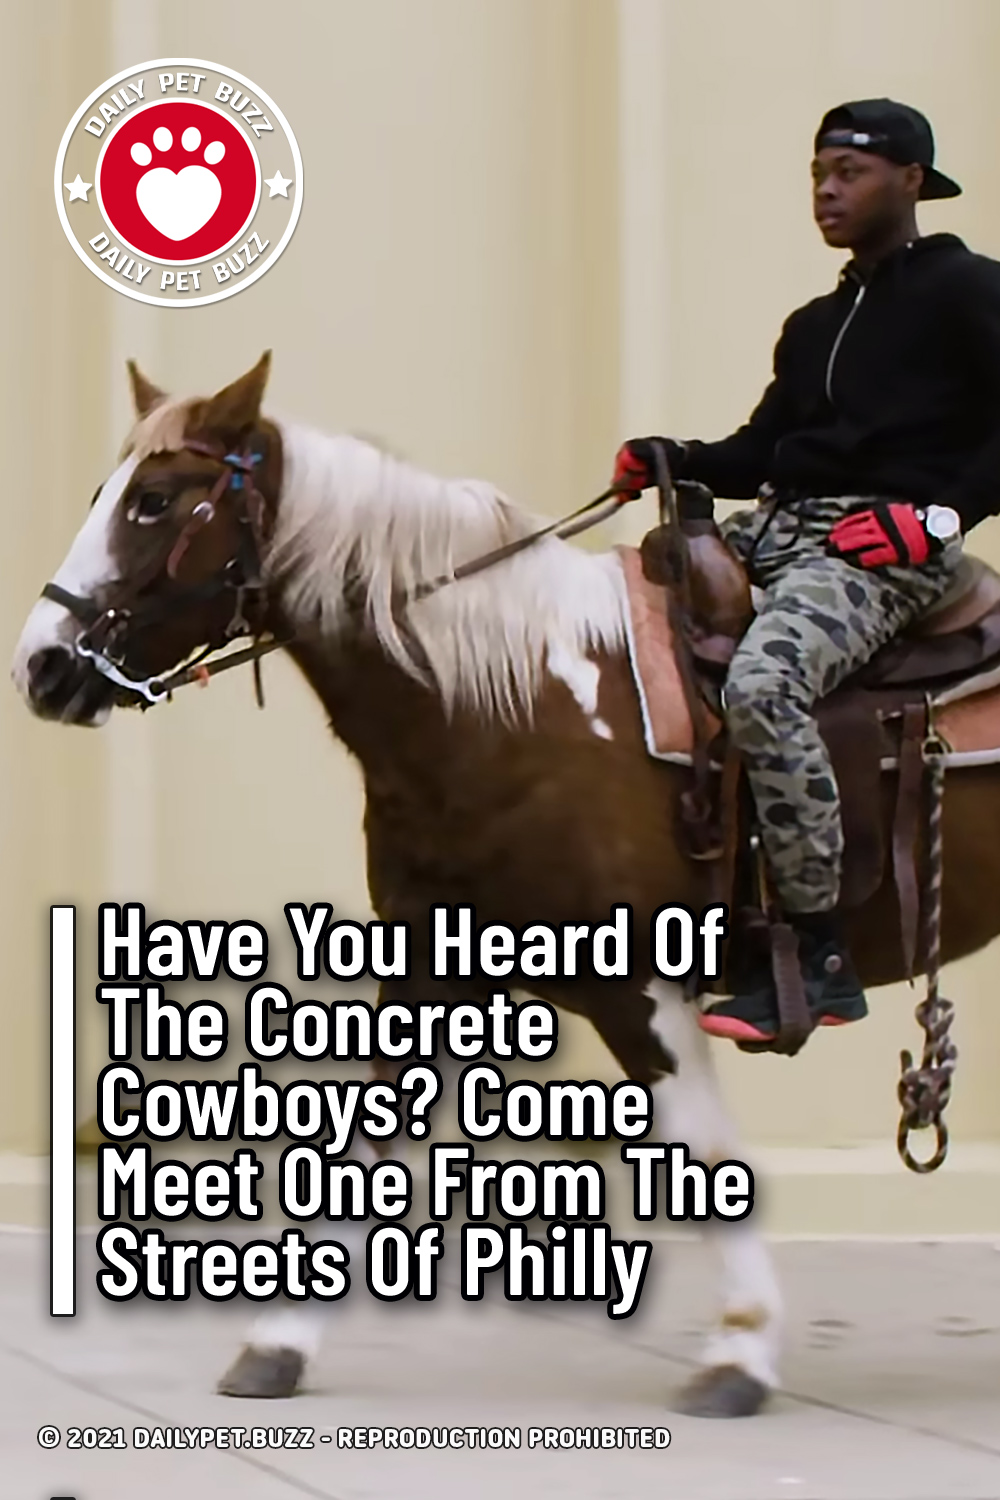 Have You Heard Of The Concrete Cowboys? Come Meet One From The Streets Of Philly